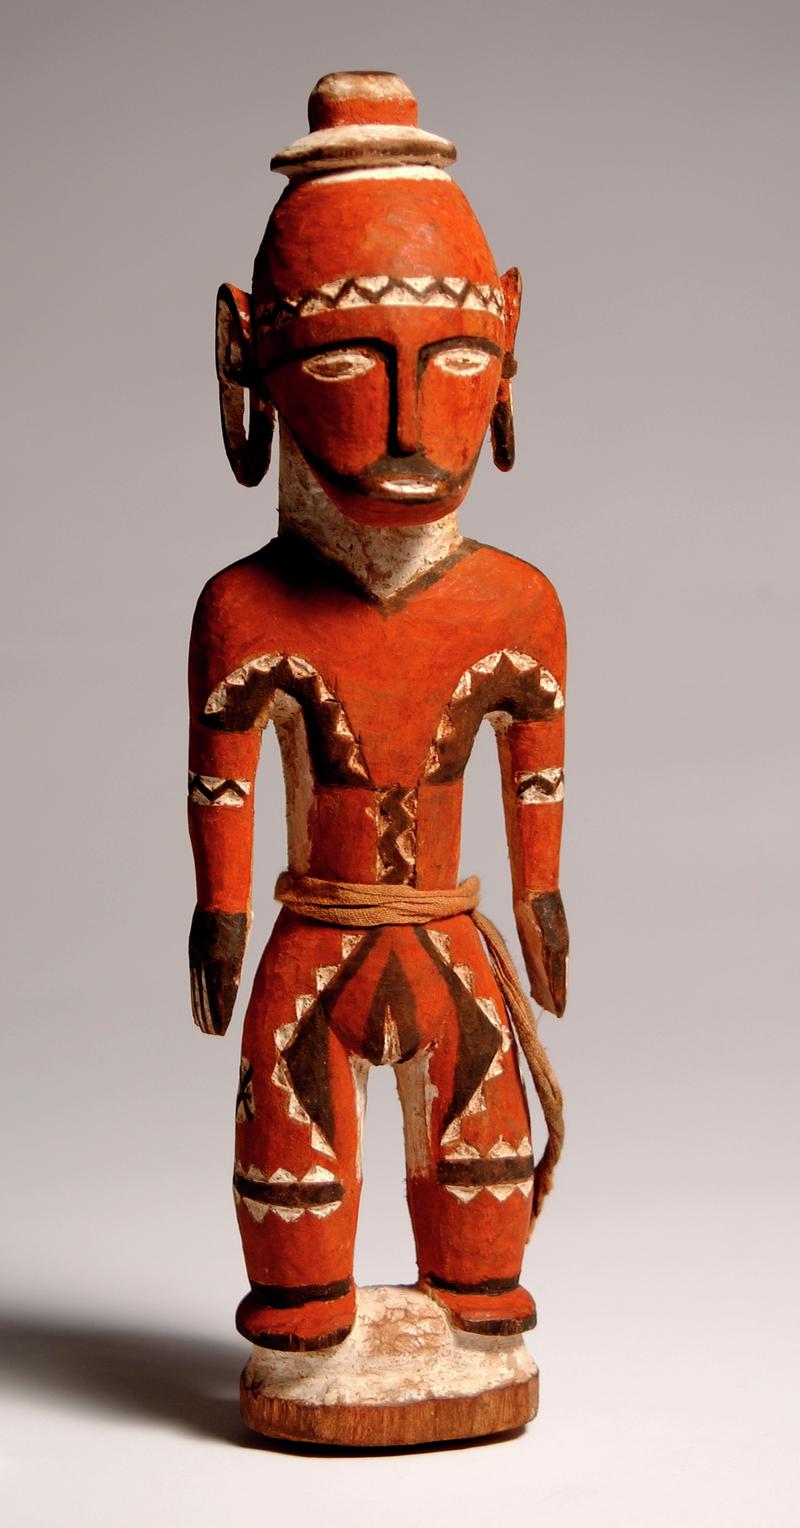 Aboriginal doll, possibly of totemic significance and possibly of South Pacific origins; carved into human form from one piece of wood; painted red, with black and white painted patterns.